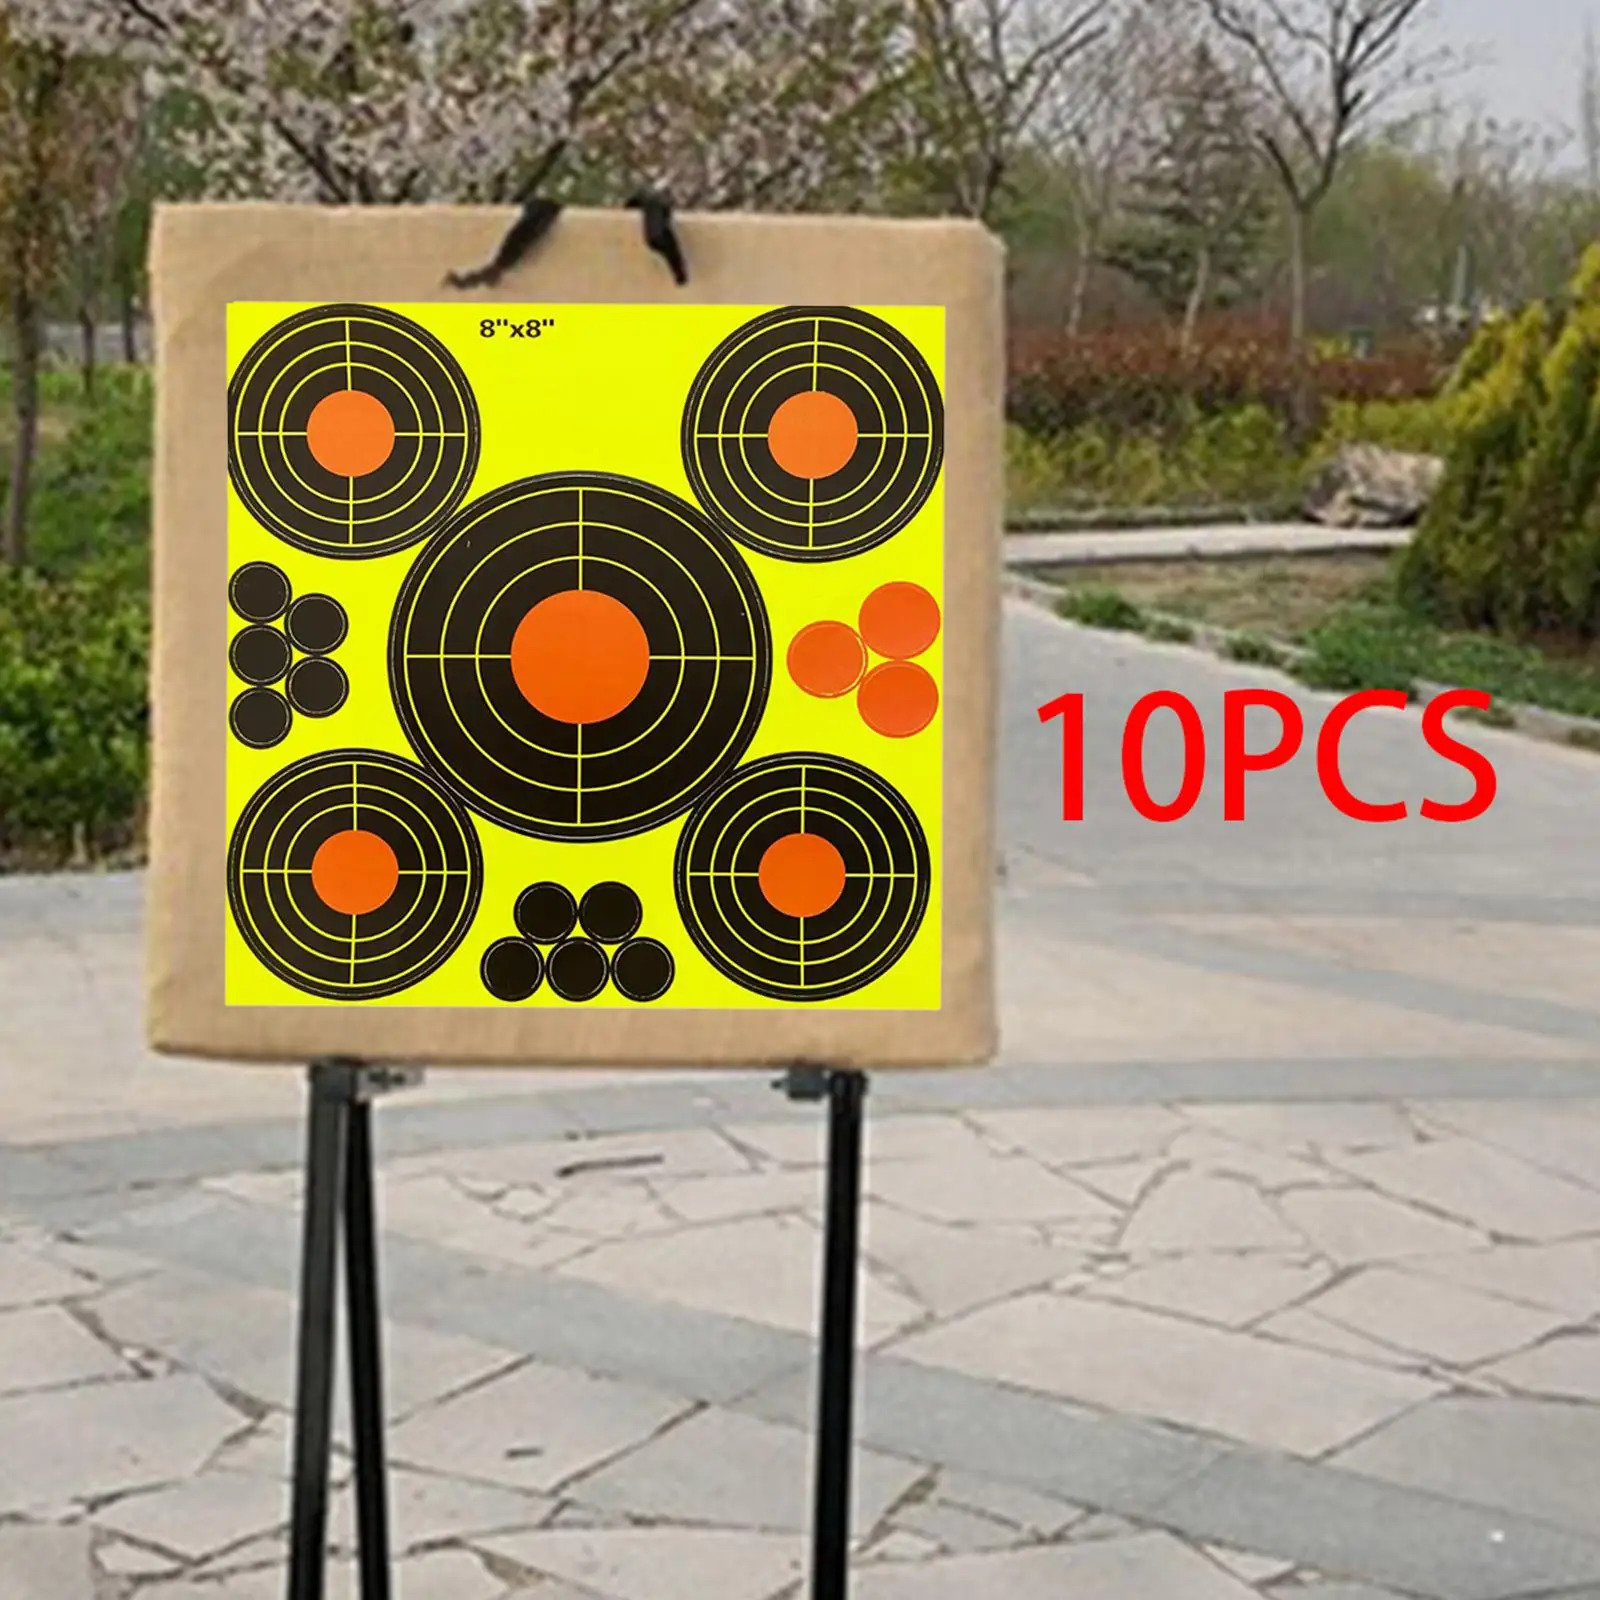 10 Targets Shooting Exercise Reactive Target Target Paper Stickers